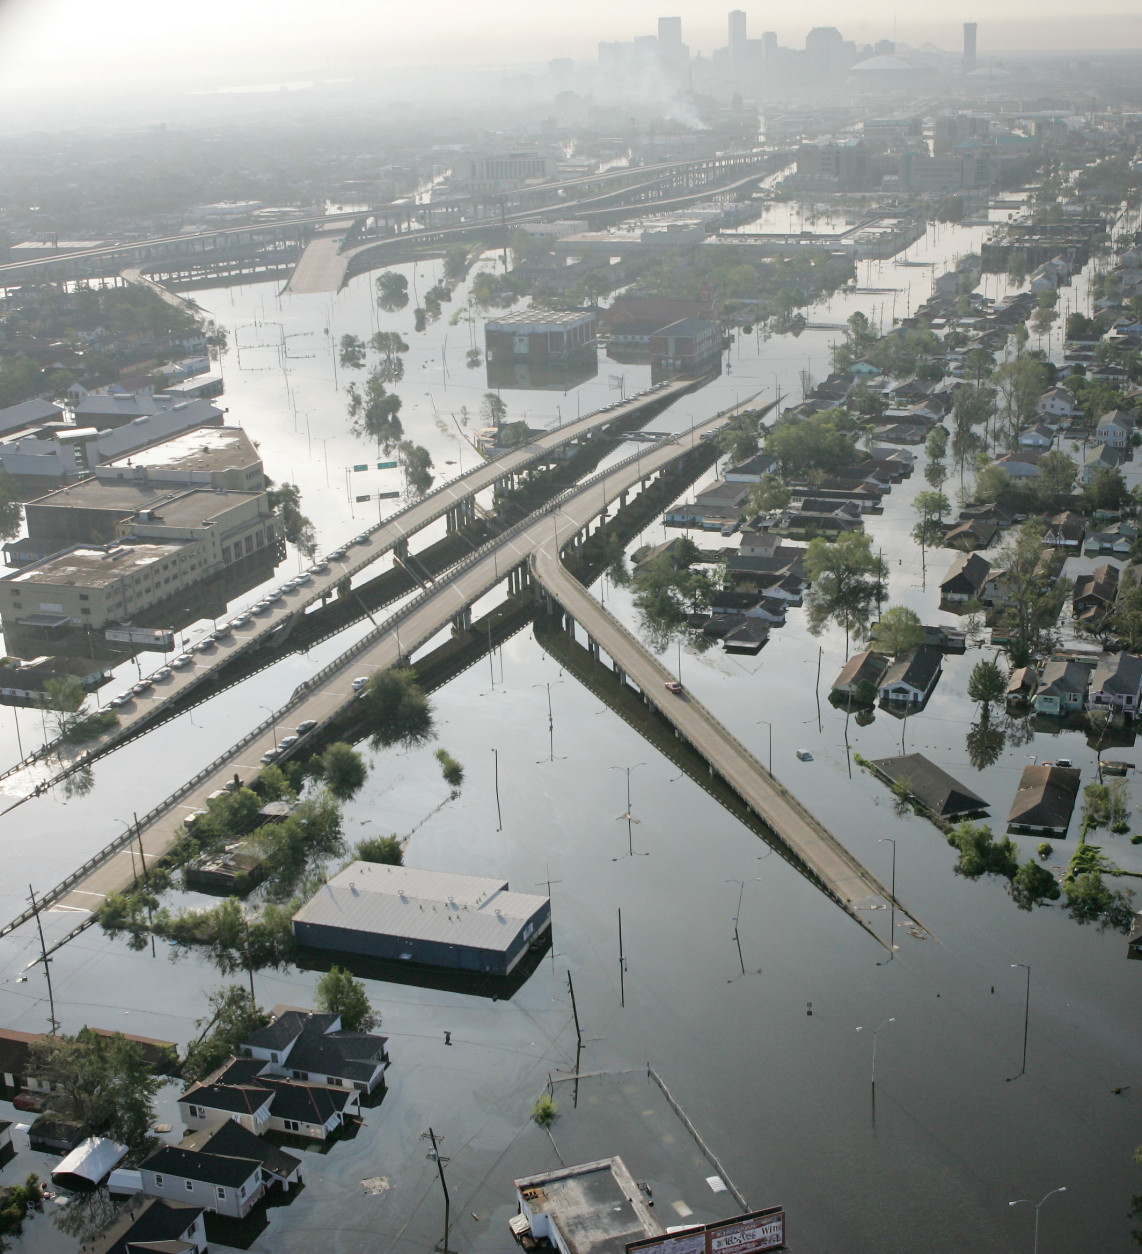 Flood waters from Hurricane Katrina fill the streets near downtown New Orleans Tuesday, Aug. 30, 2005 in New Orleans. Hurricane Katrina did extensive damage when it made landfall on Monday. (AP Photo/David J. Phillip)